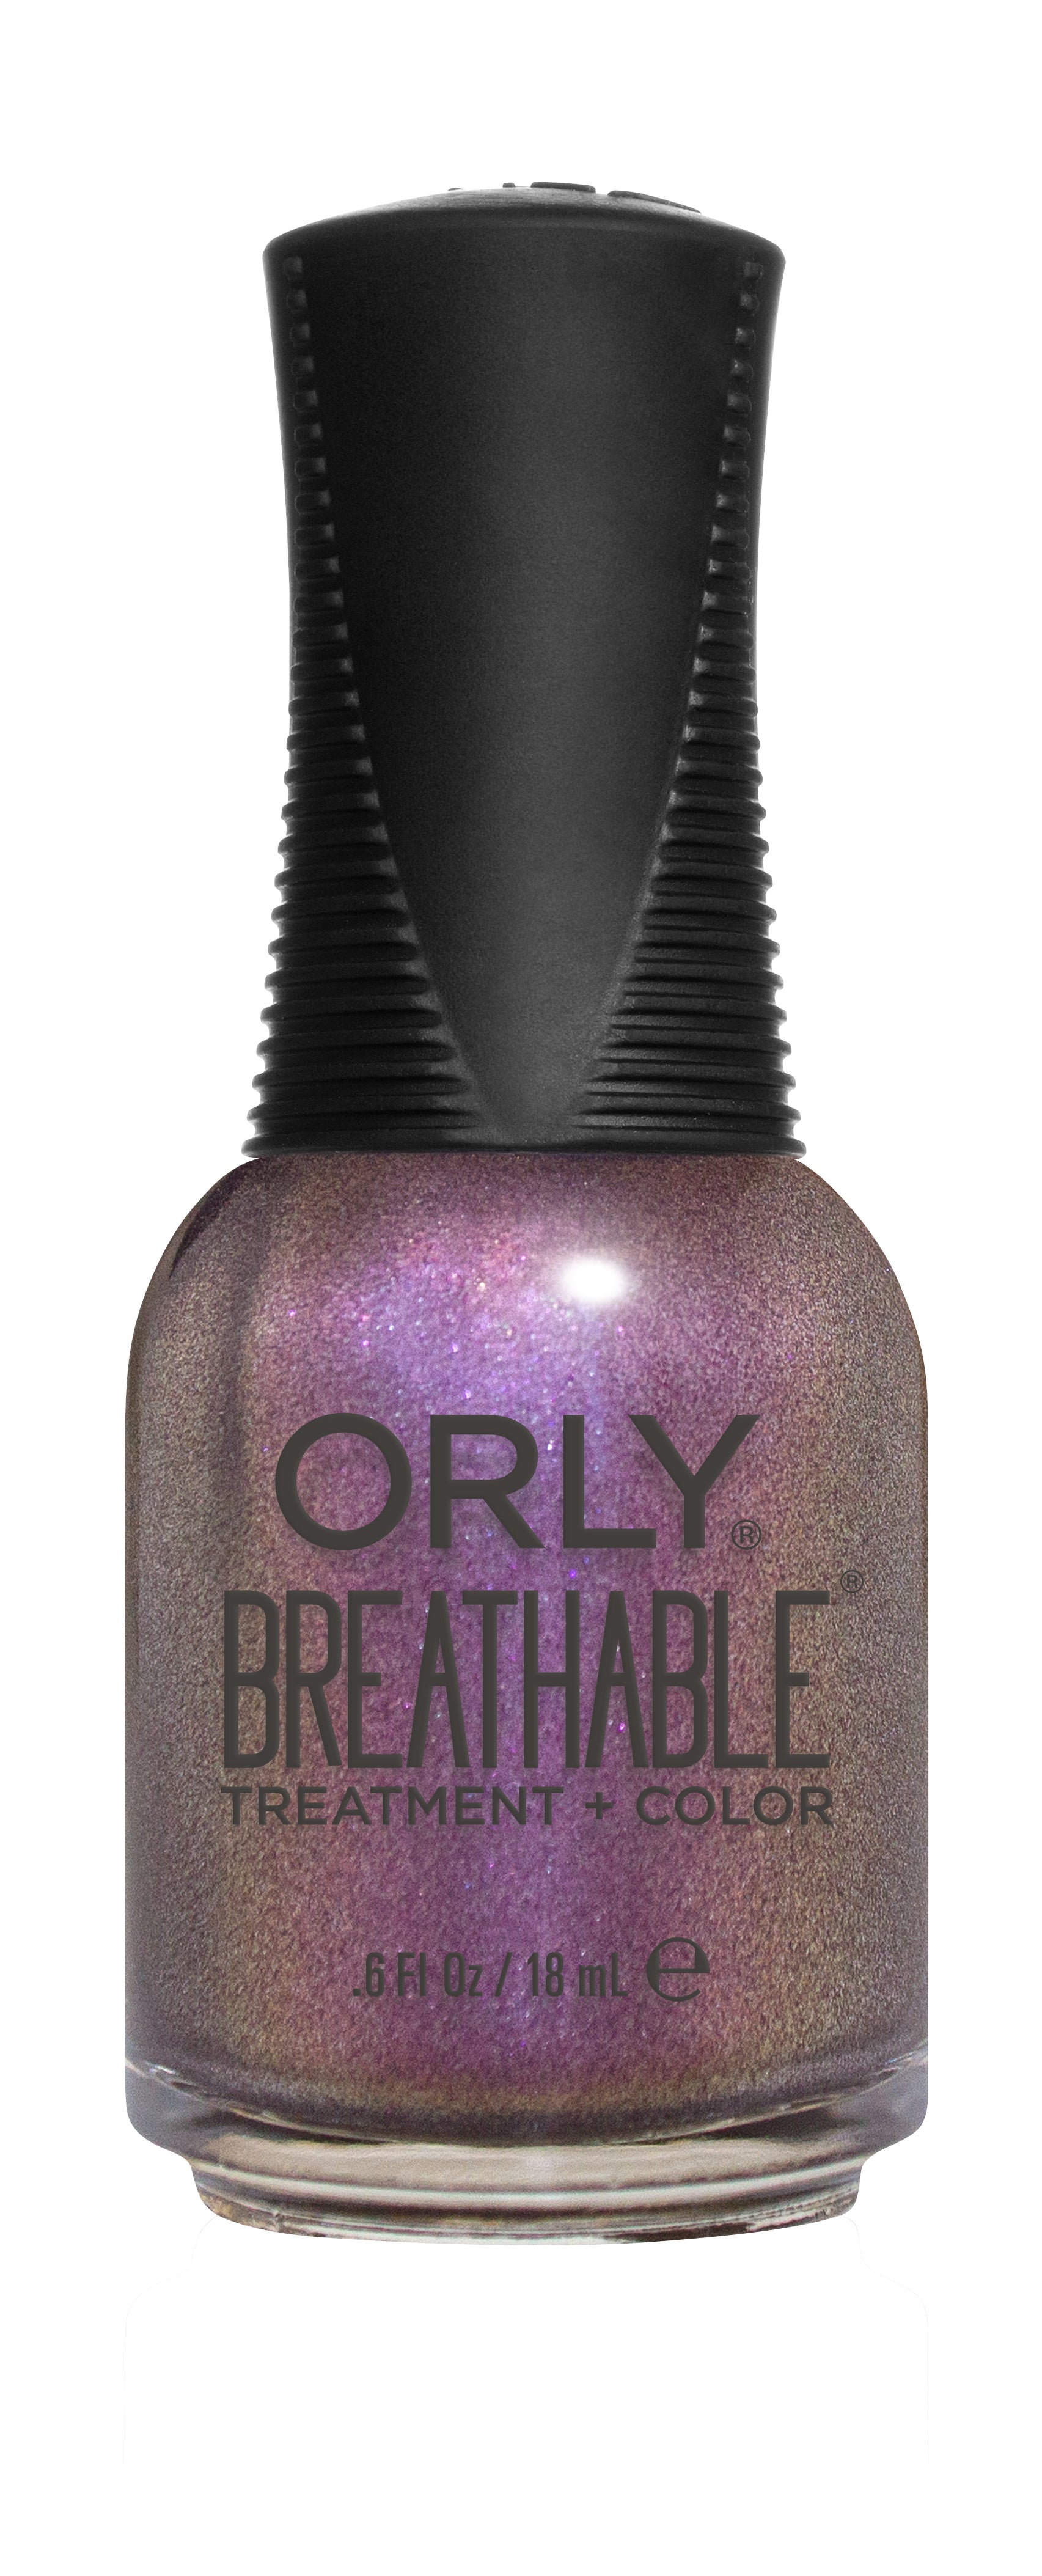 You're A Gem - ORLY Breathable Treatment + Color